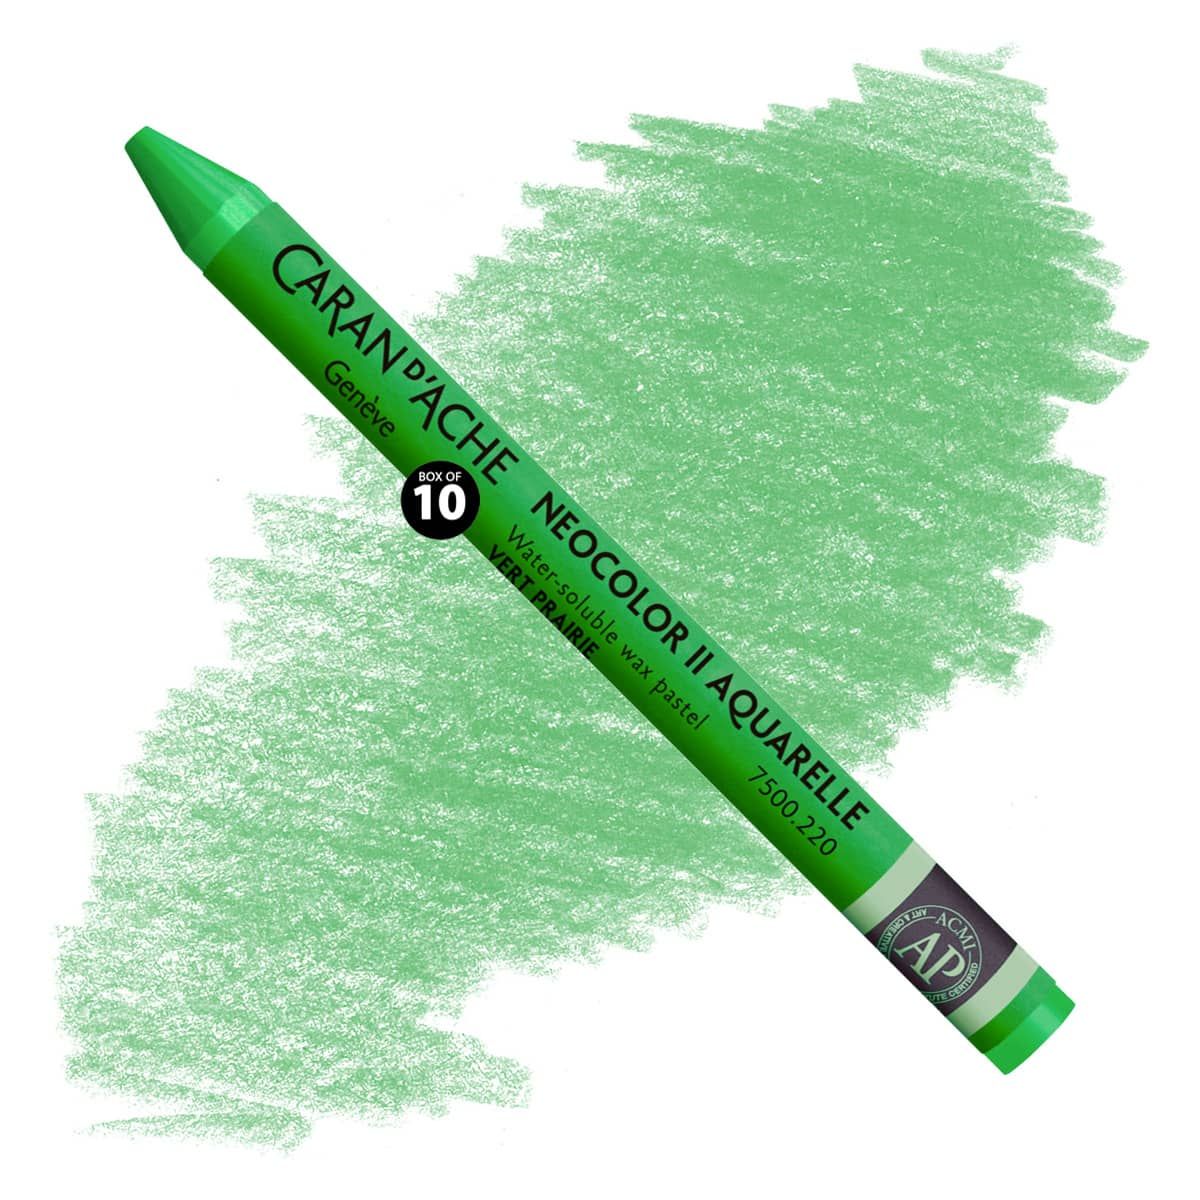 Caran d'Ache Neocolor II Water-Soluble Wax Pastels - Grass Green, No. 220 (Box of 10)